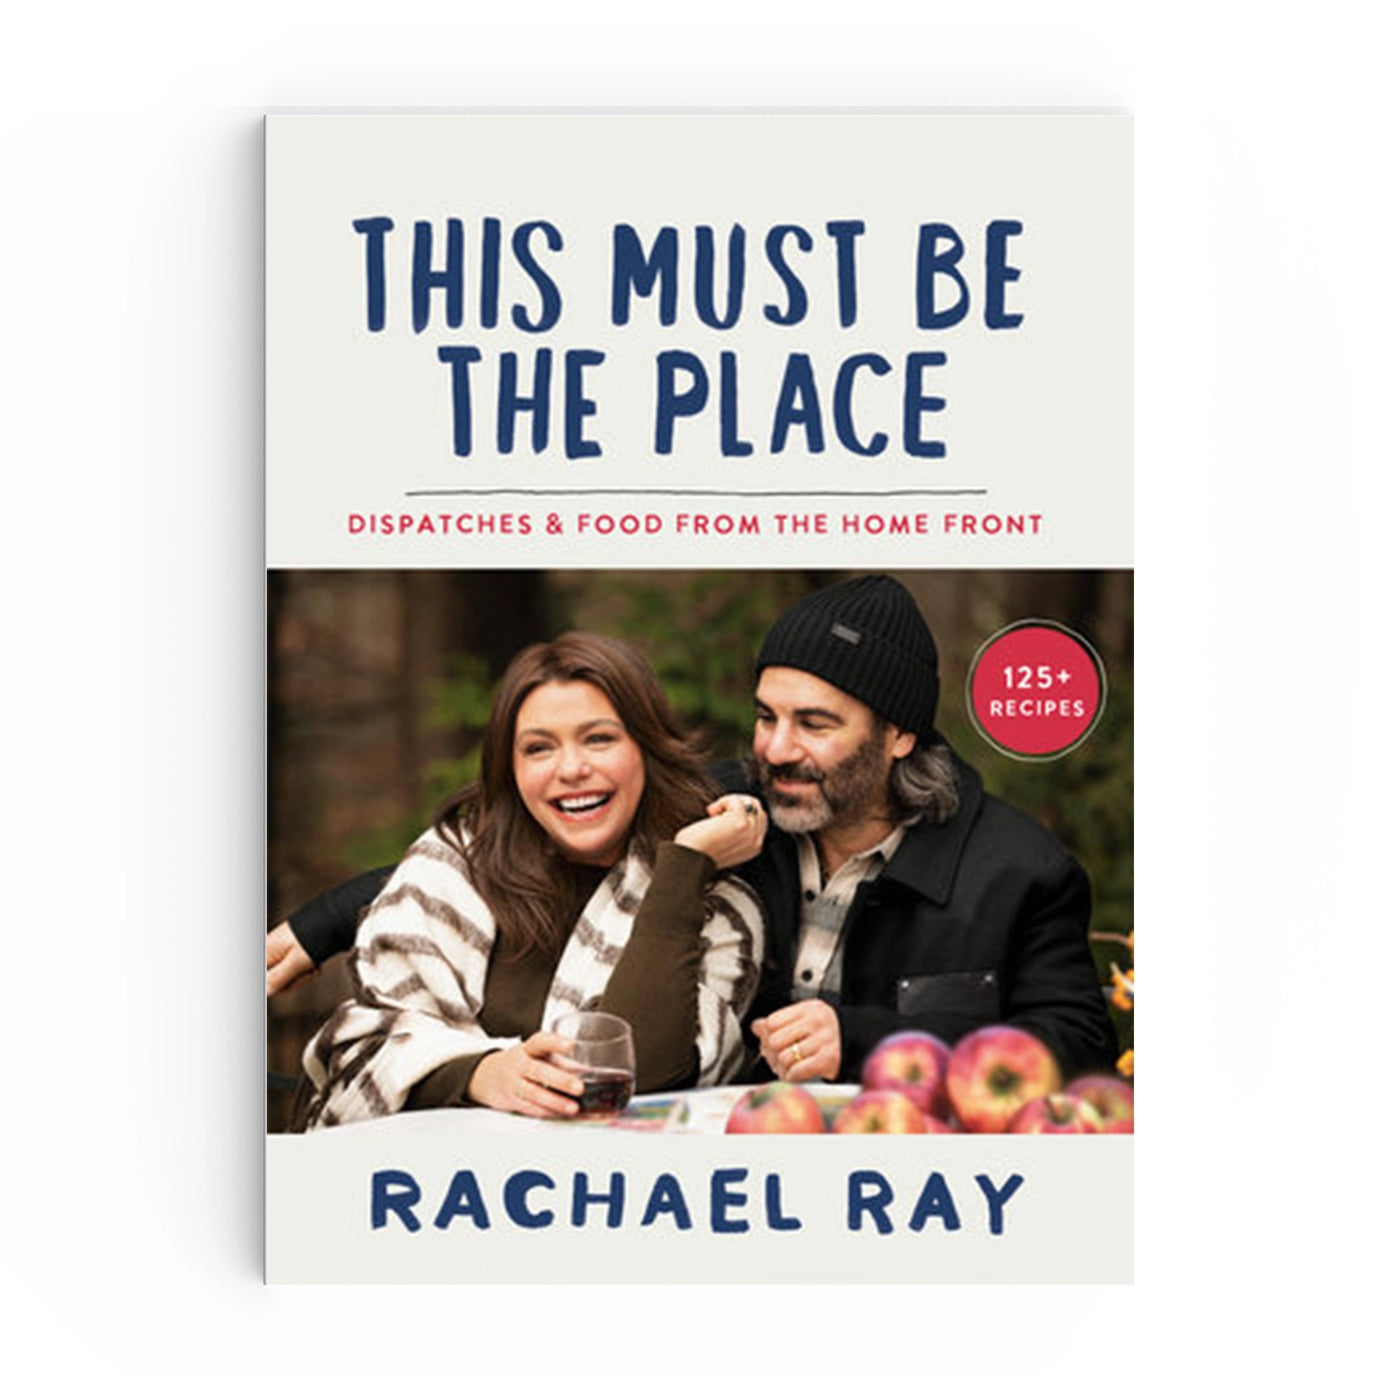 This Must Be the Place by Rachel Ray